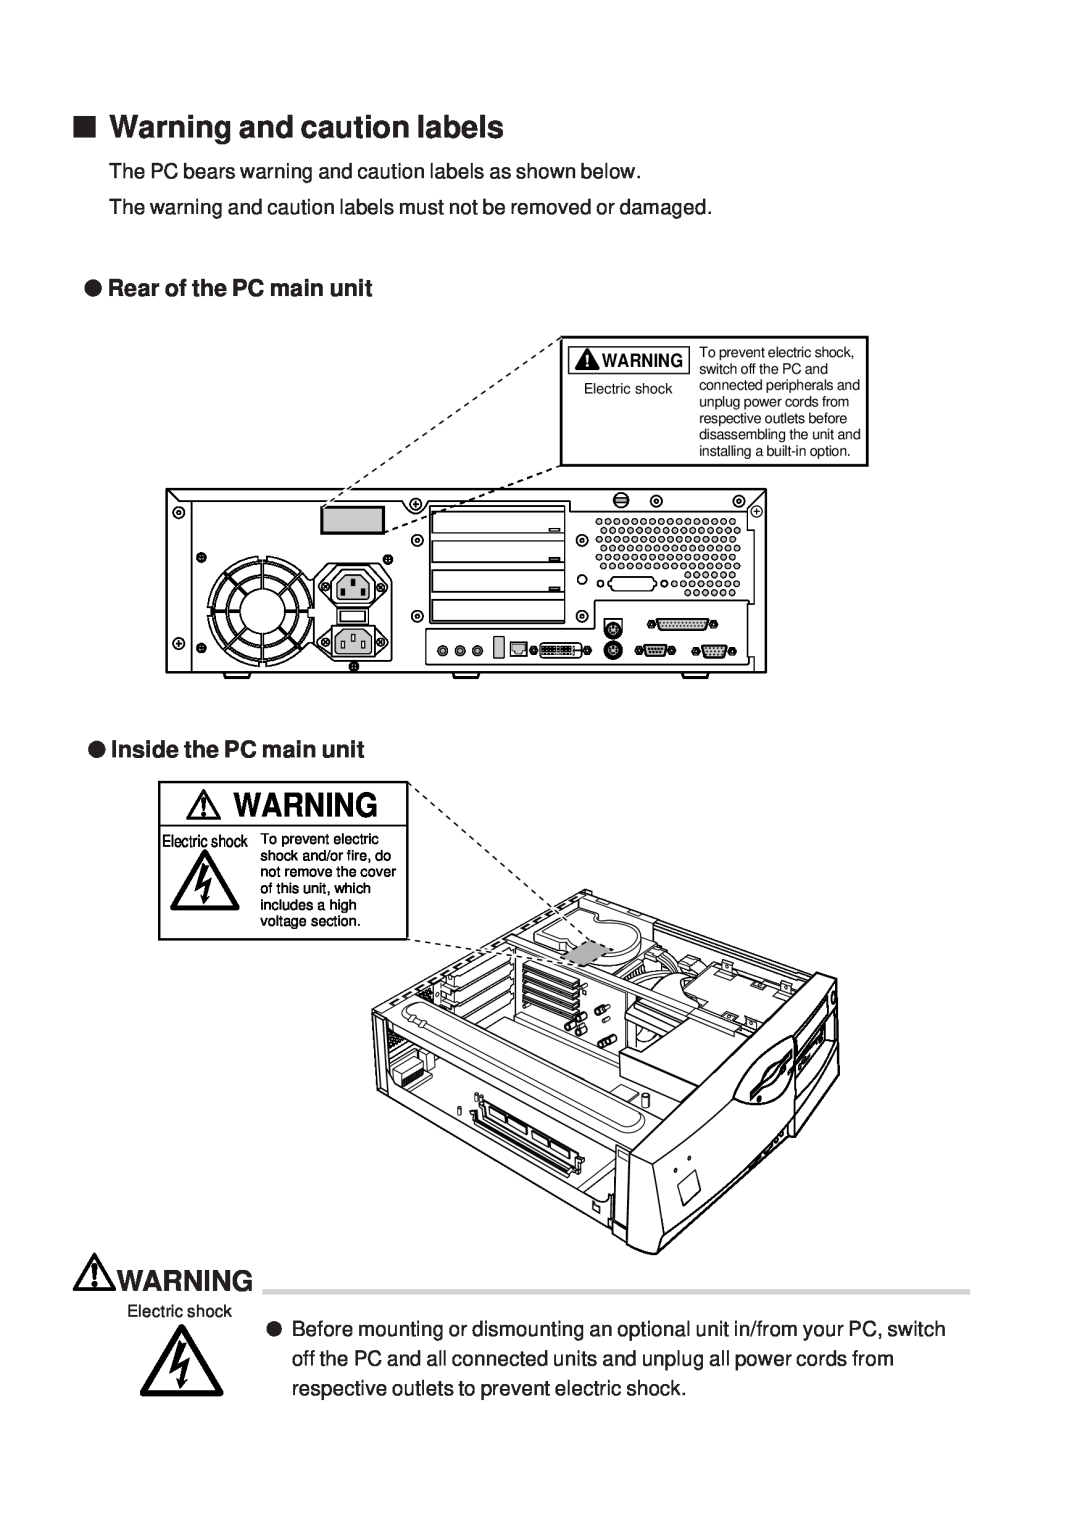 Fujitsu 5000 user manual Warning and caution labels, Rear of the PC main unit Inside the PC main unit 